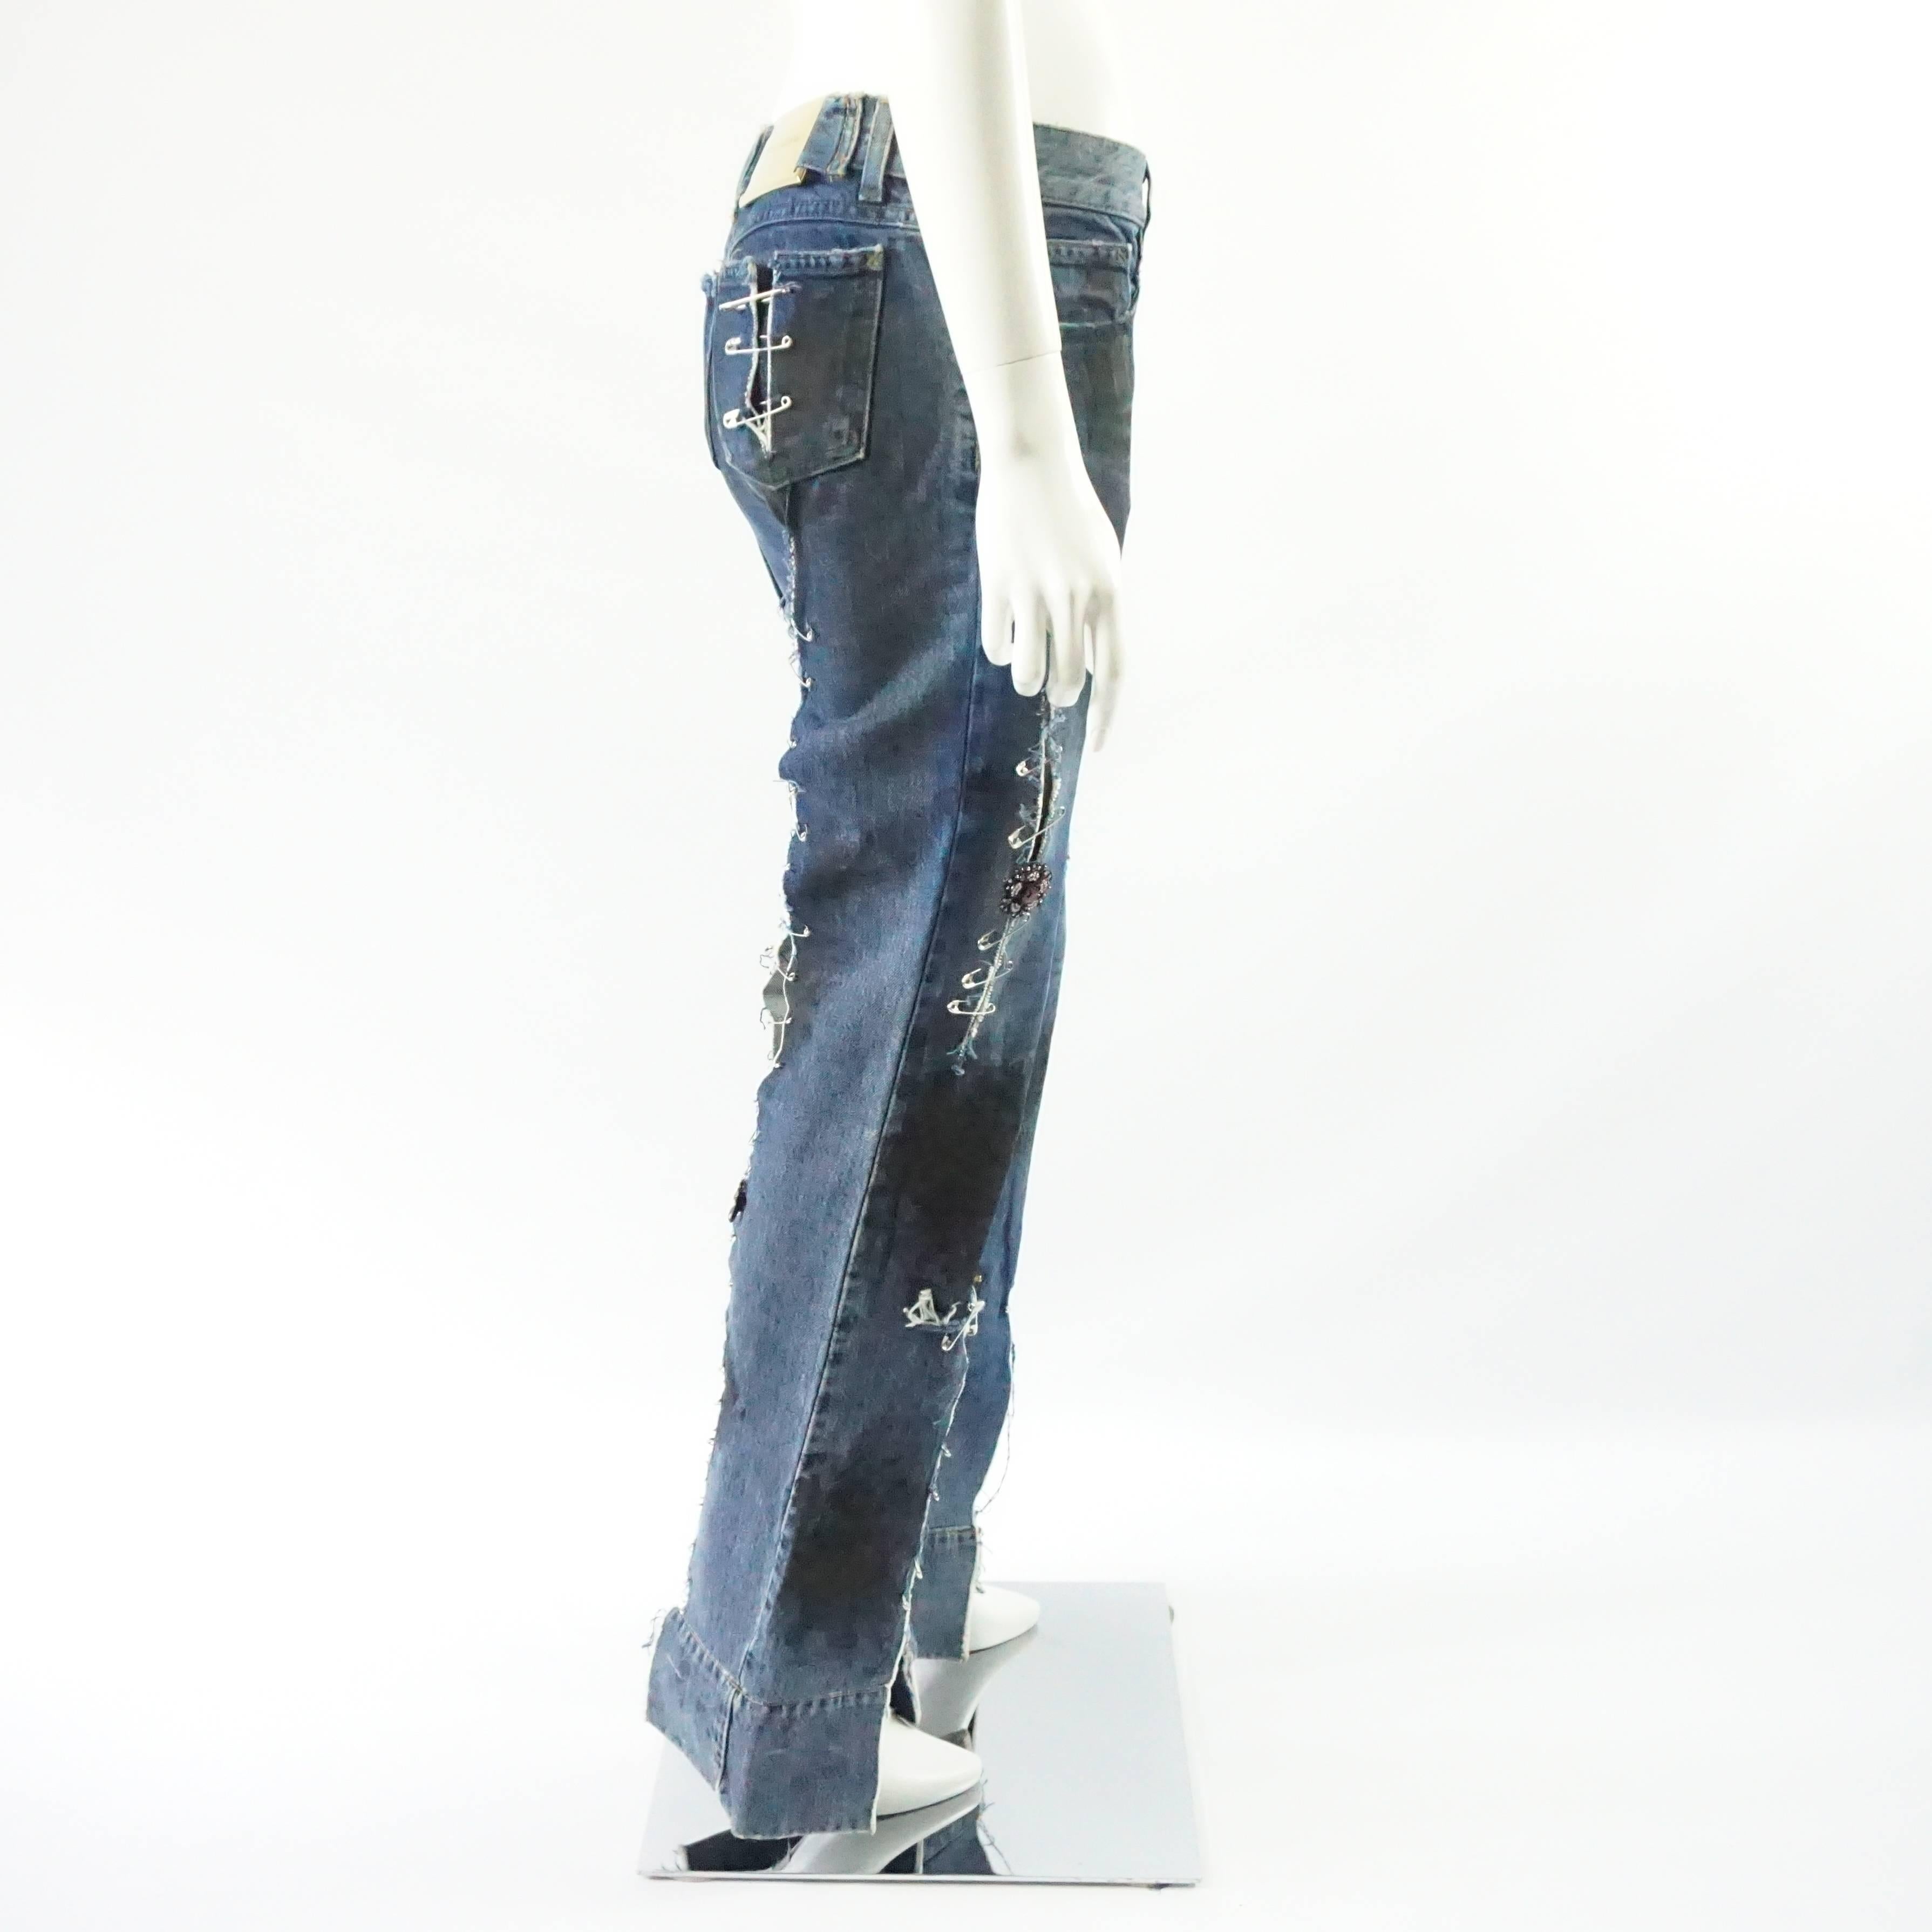 These very unique Dolce & Gabbana grunge jeans have a flared leg and are highly distressed. They have black splashes all over and slits on the thighs, bottom of the leg, back pockets, and on the back of the legs. One of the splashes is in the shape